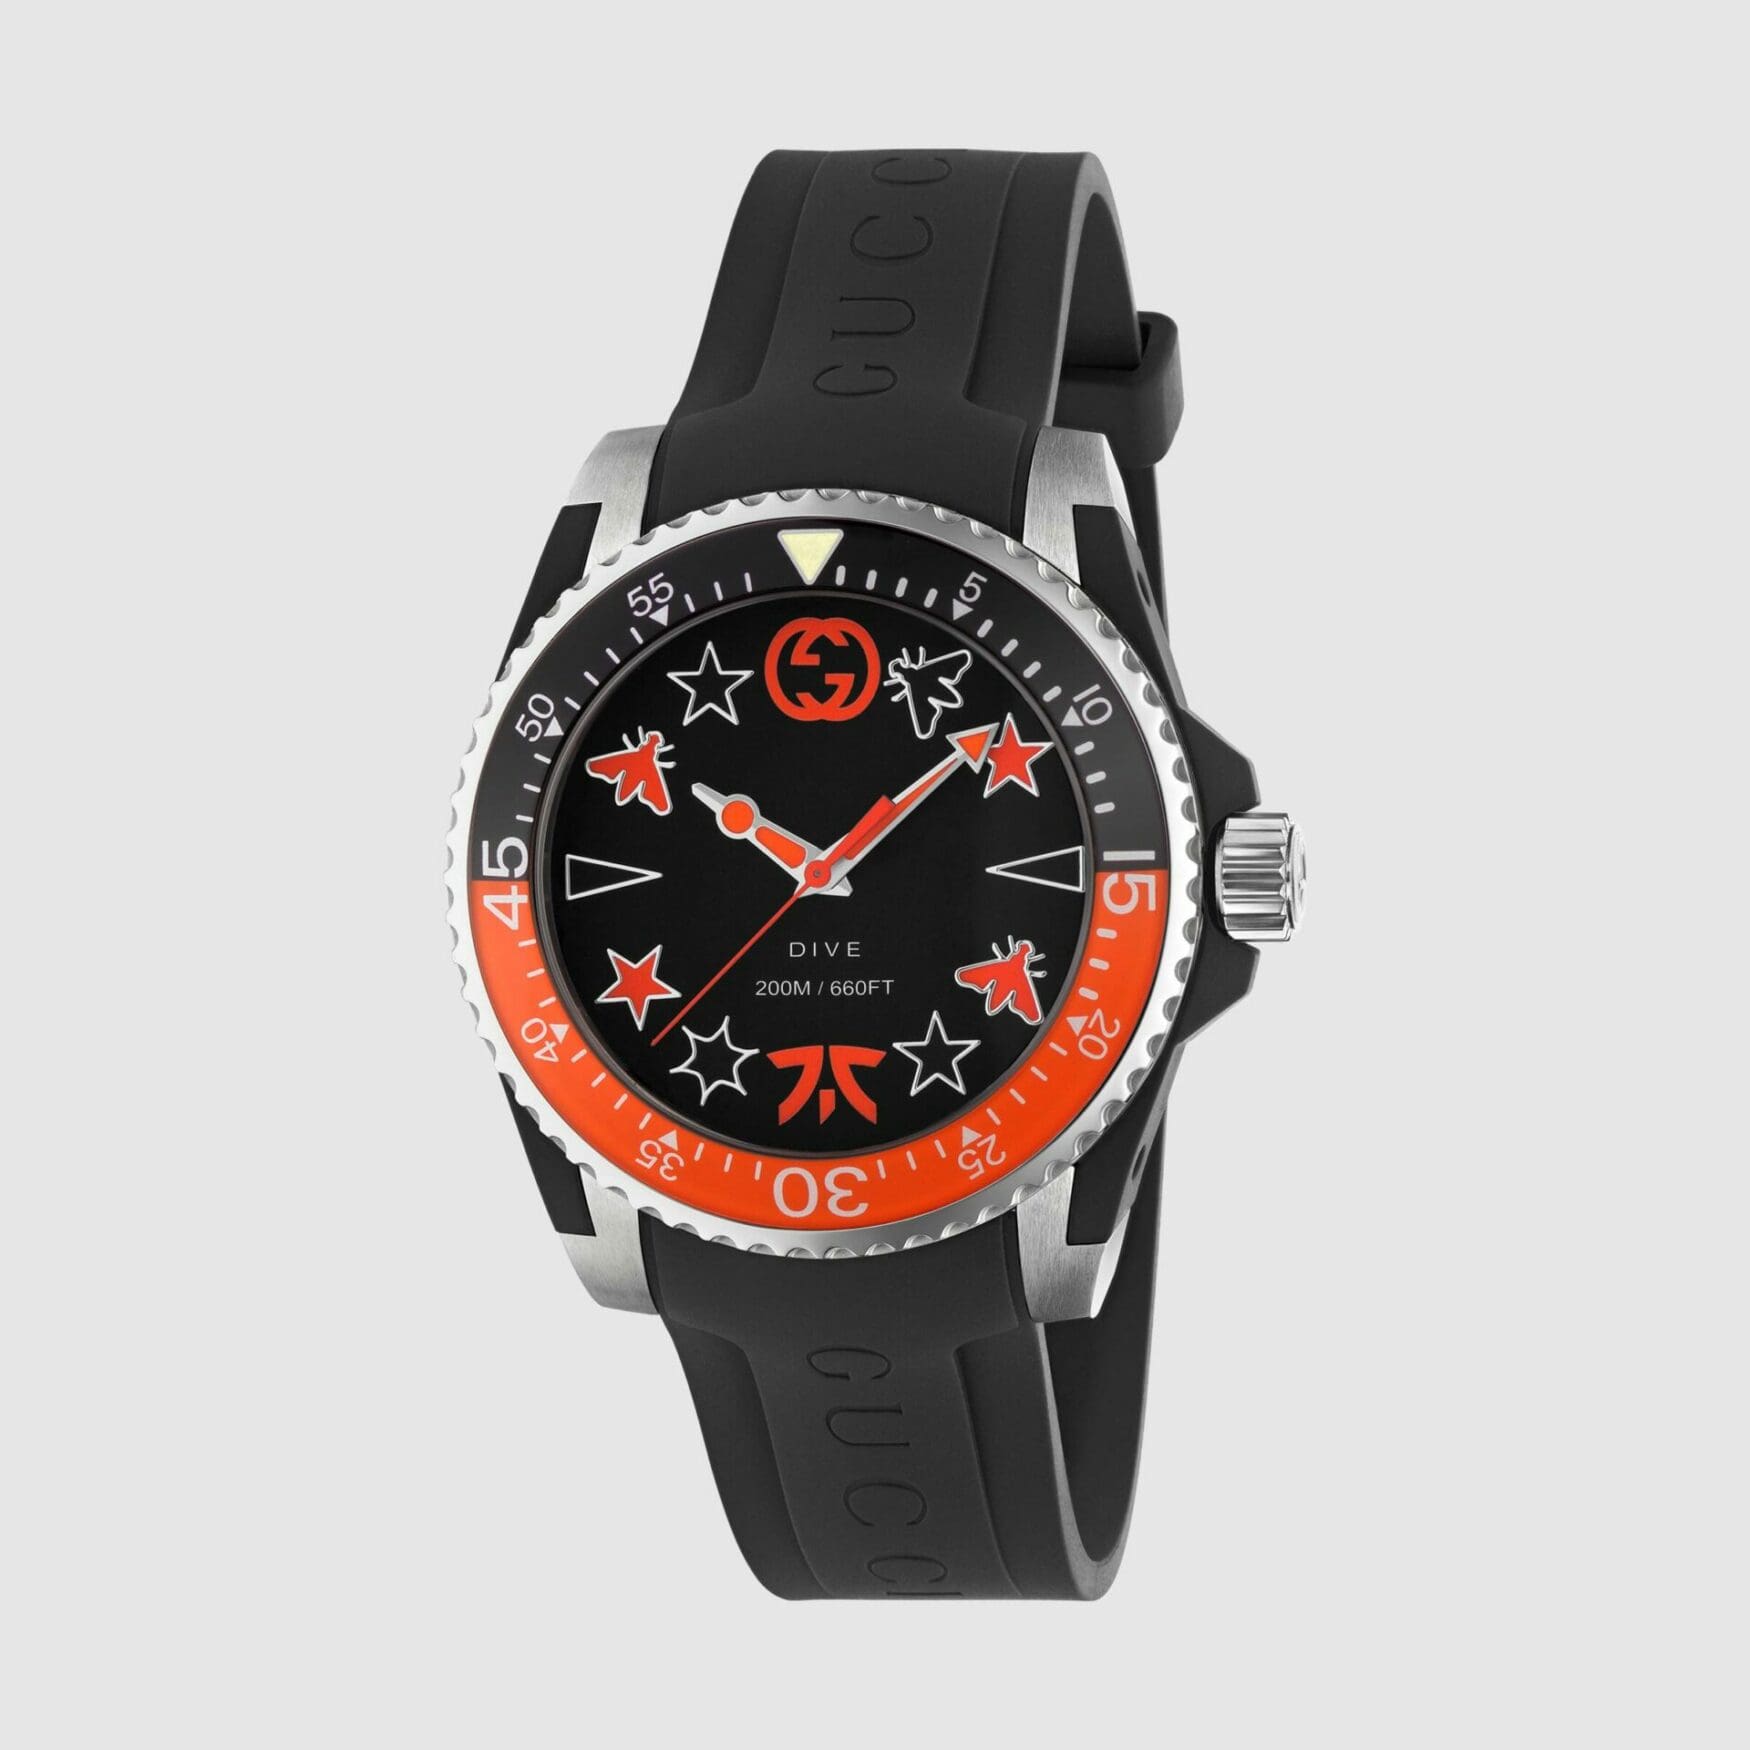 Gucci and Fnatic have bridged two worlds with their new dive watch